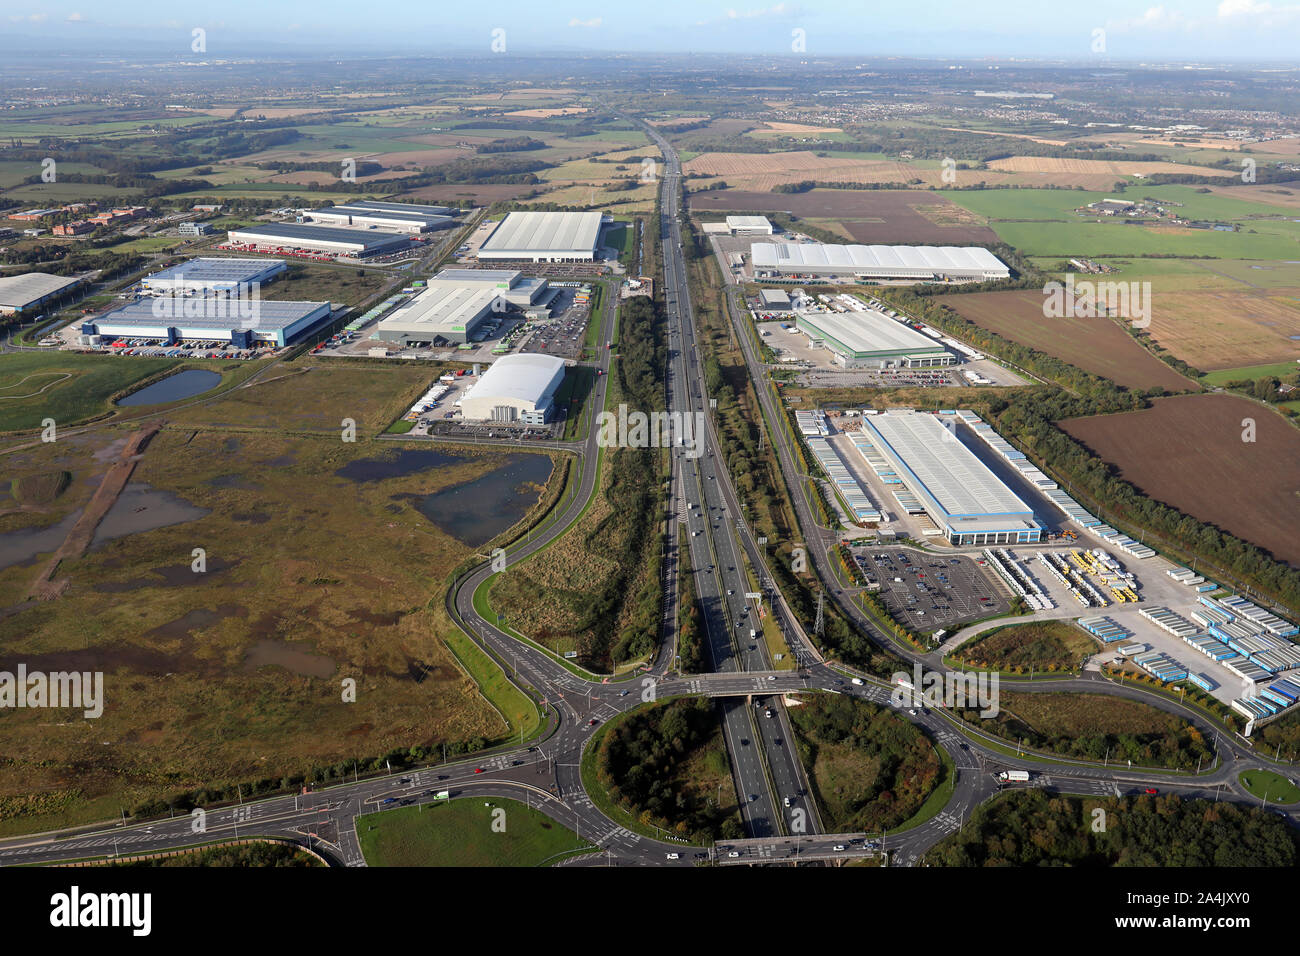 aerial view of new warehouses & logistics hubs on the M62 motorway looking west from junction 8, Burtonwood, Warrington, Cheshire, UK Stock Photo